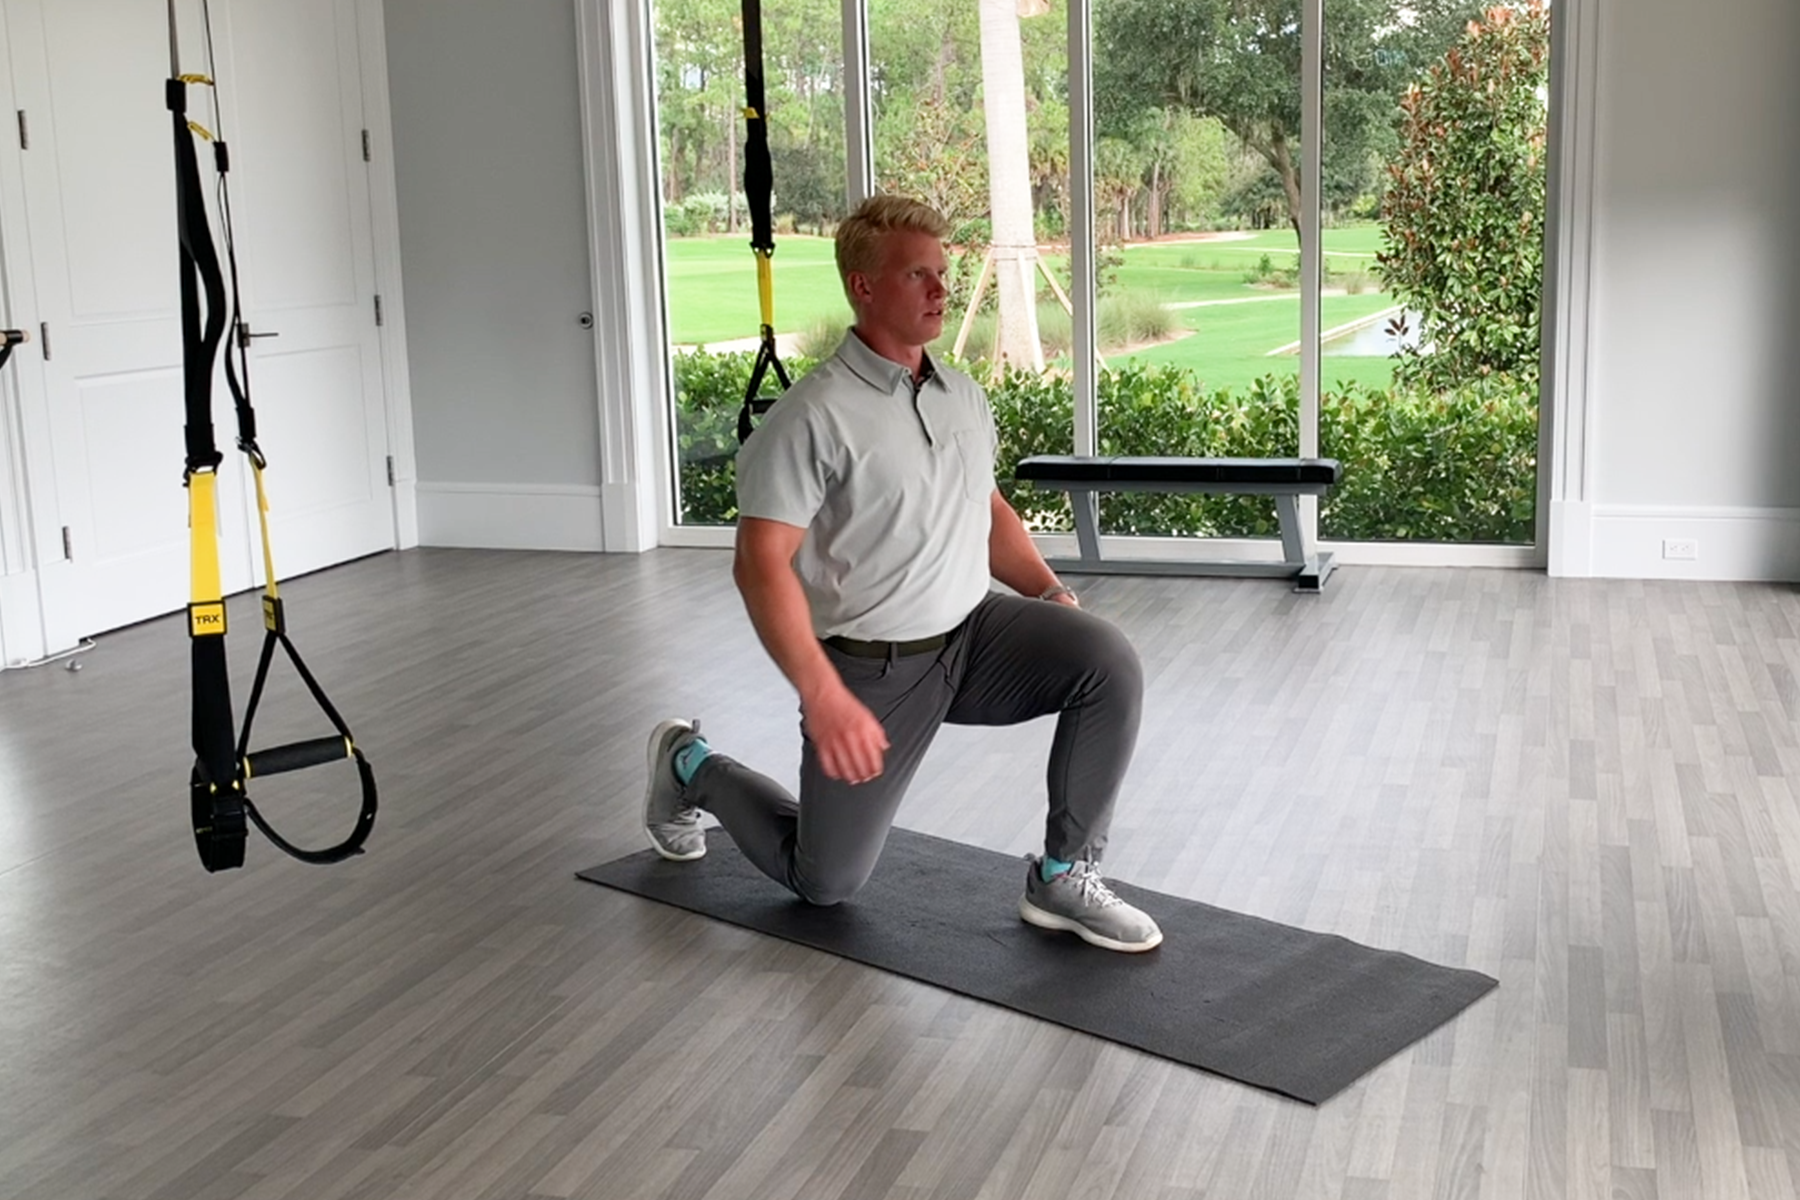 4 sandbag exercises to add power to your golf swing